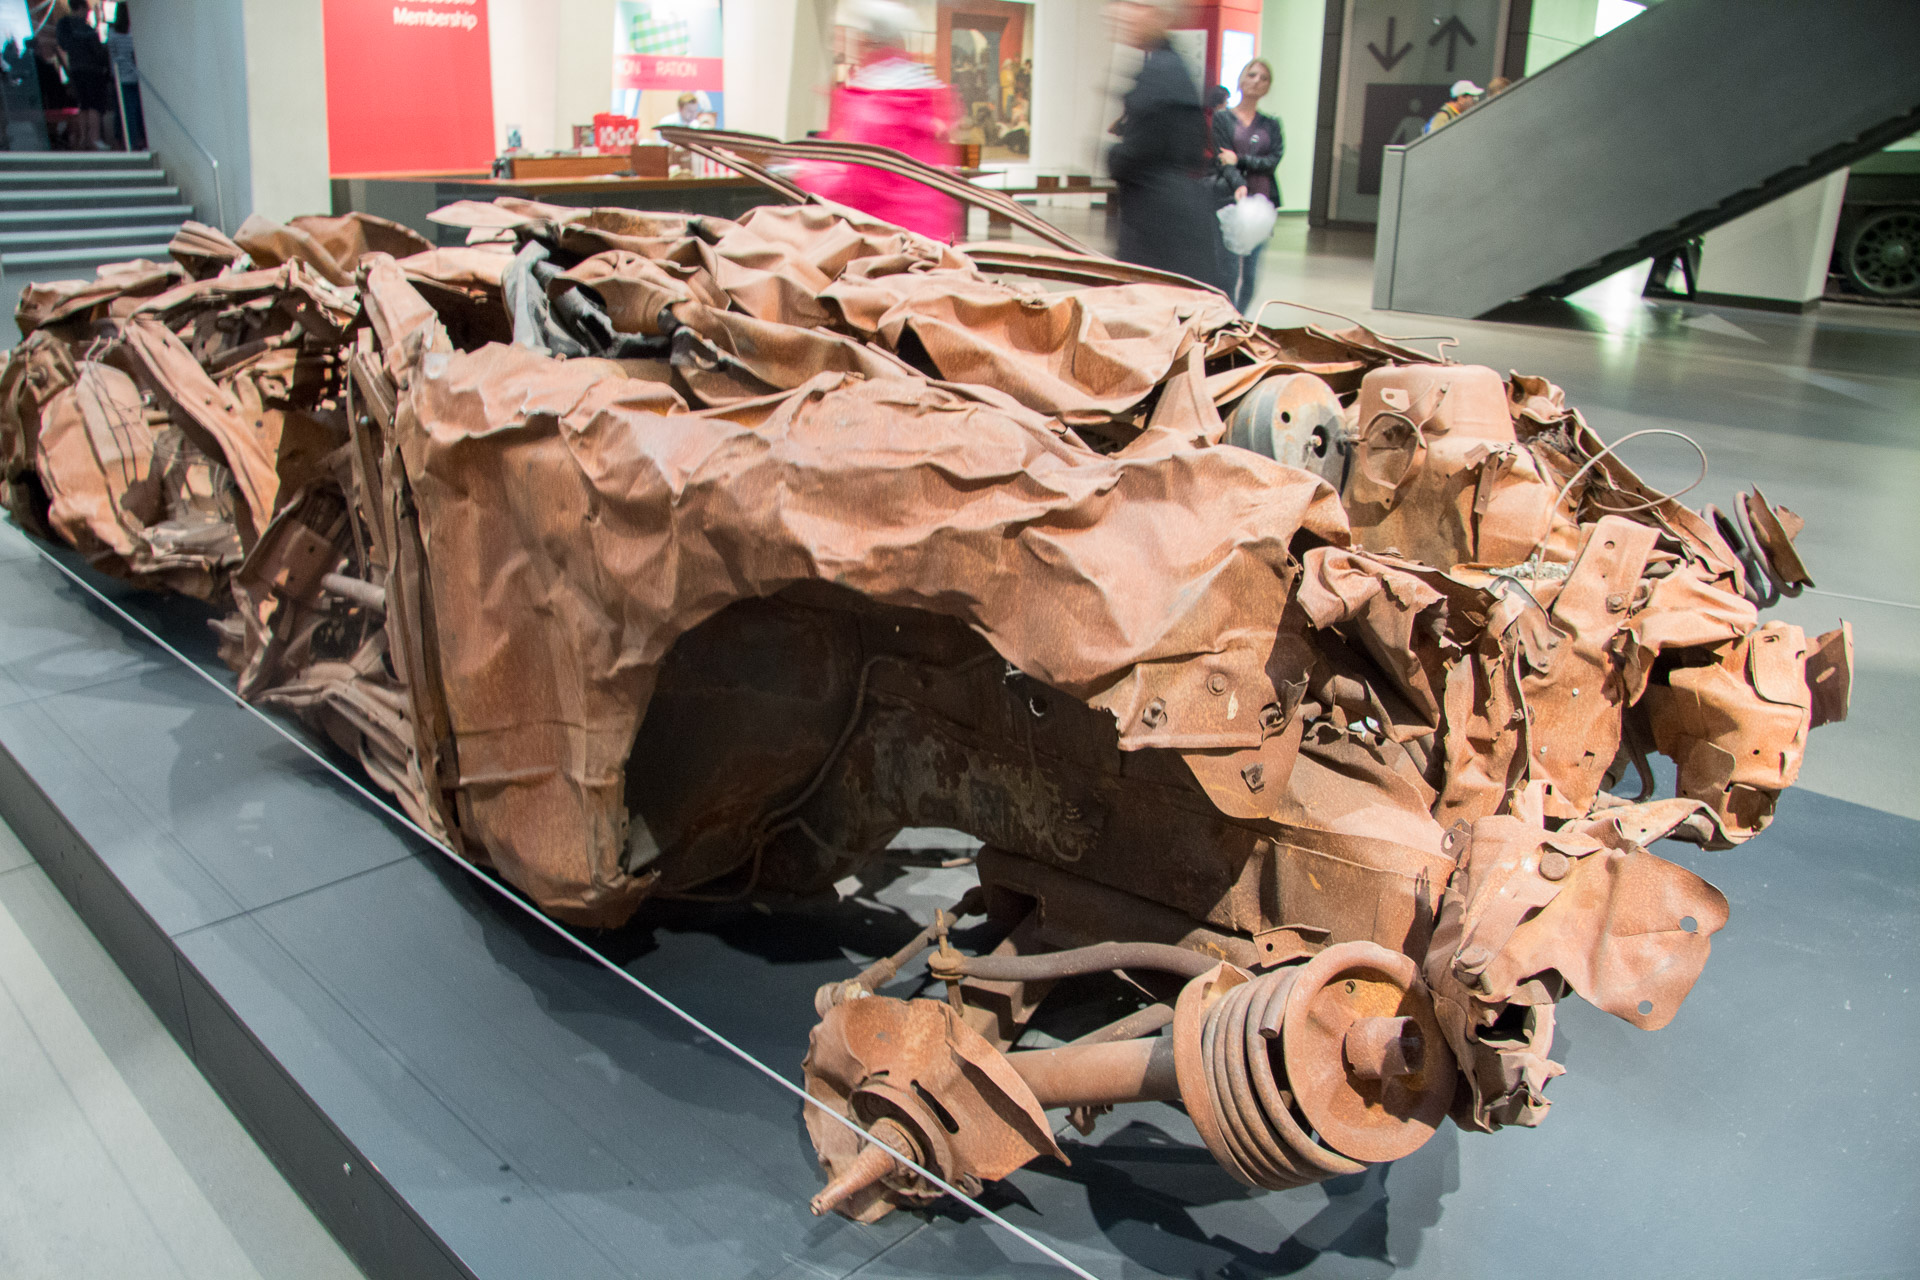 Wreck from Iraqi car bomb at the Imperial War Museum in London